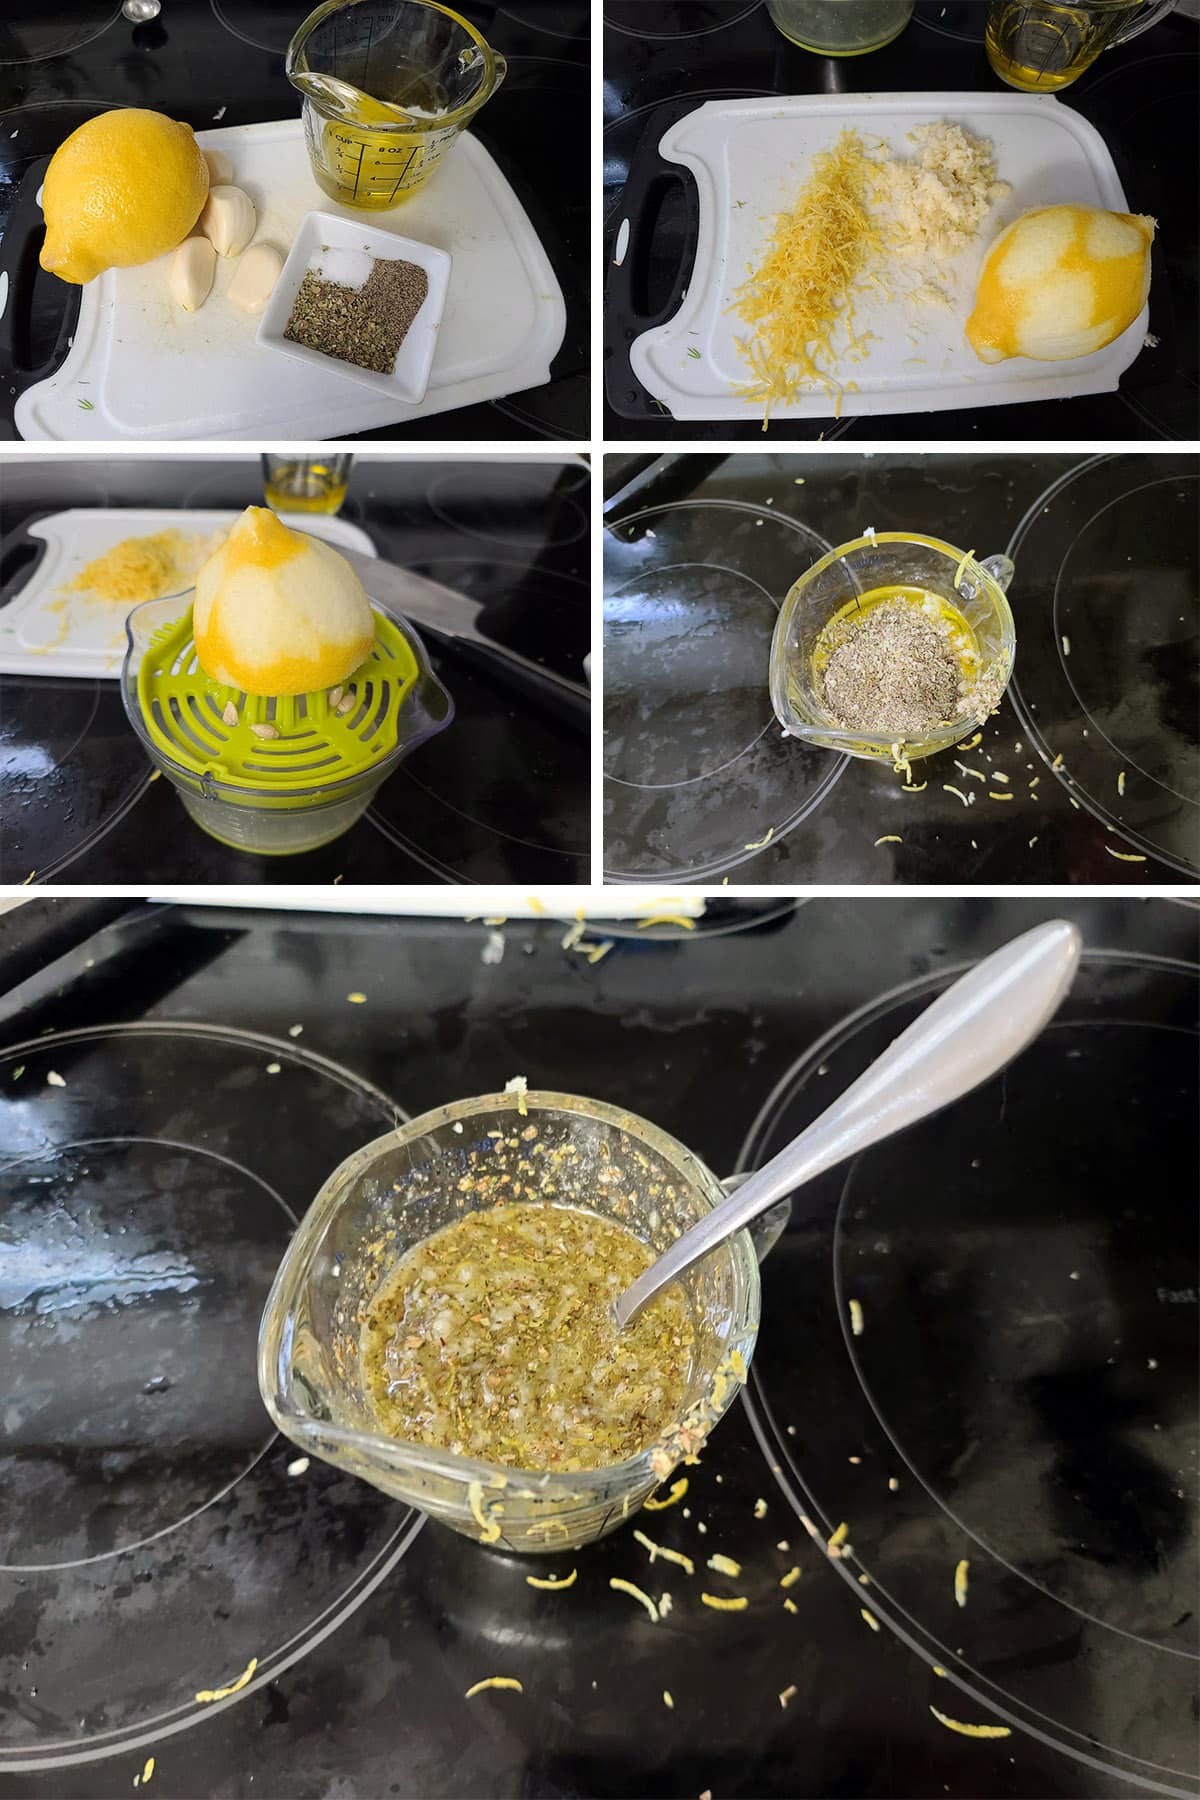 A 5 part image showing the lemon being zested and juiced, and the souvlaki marinade being mixed.